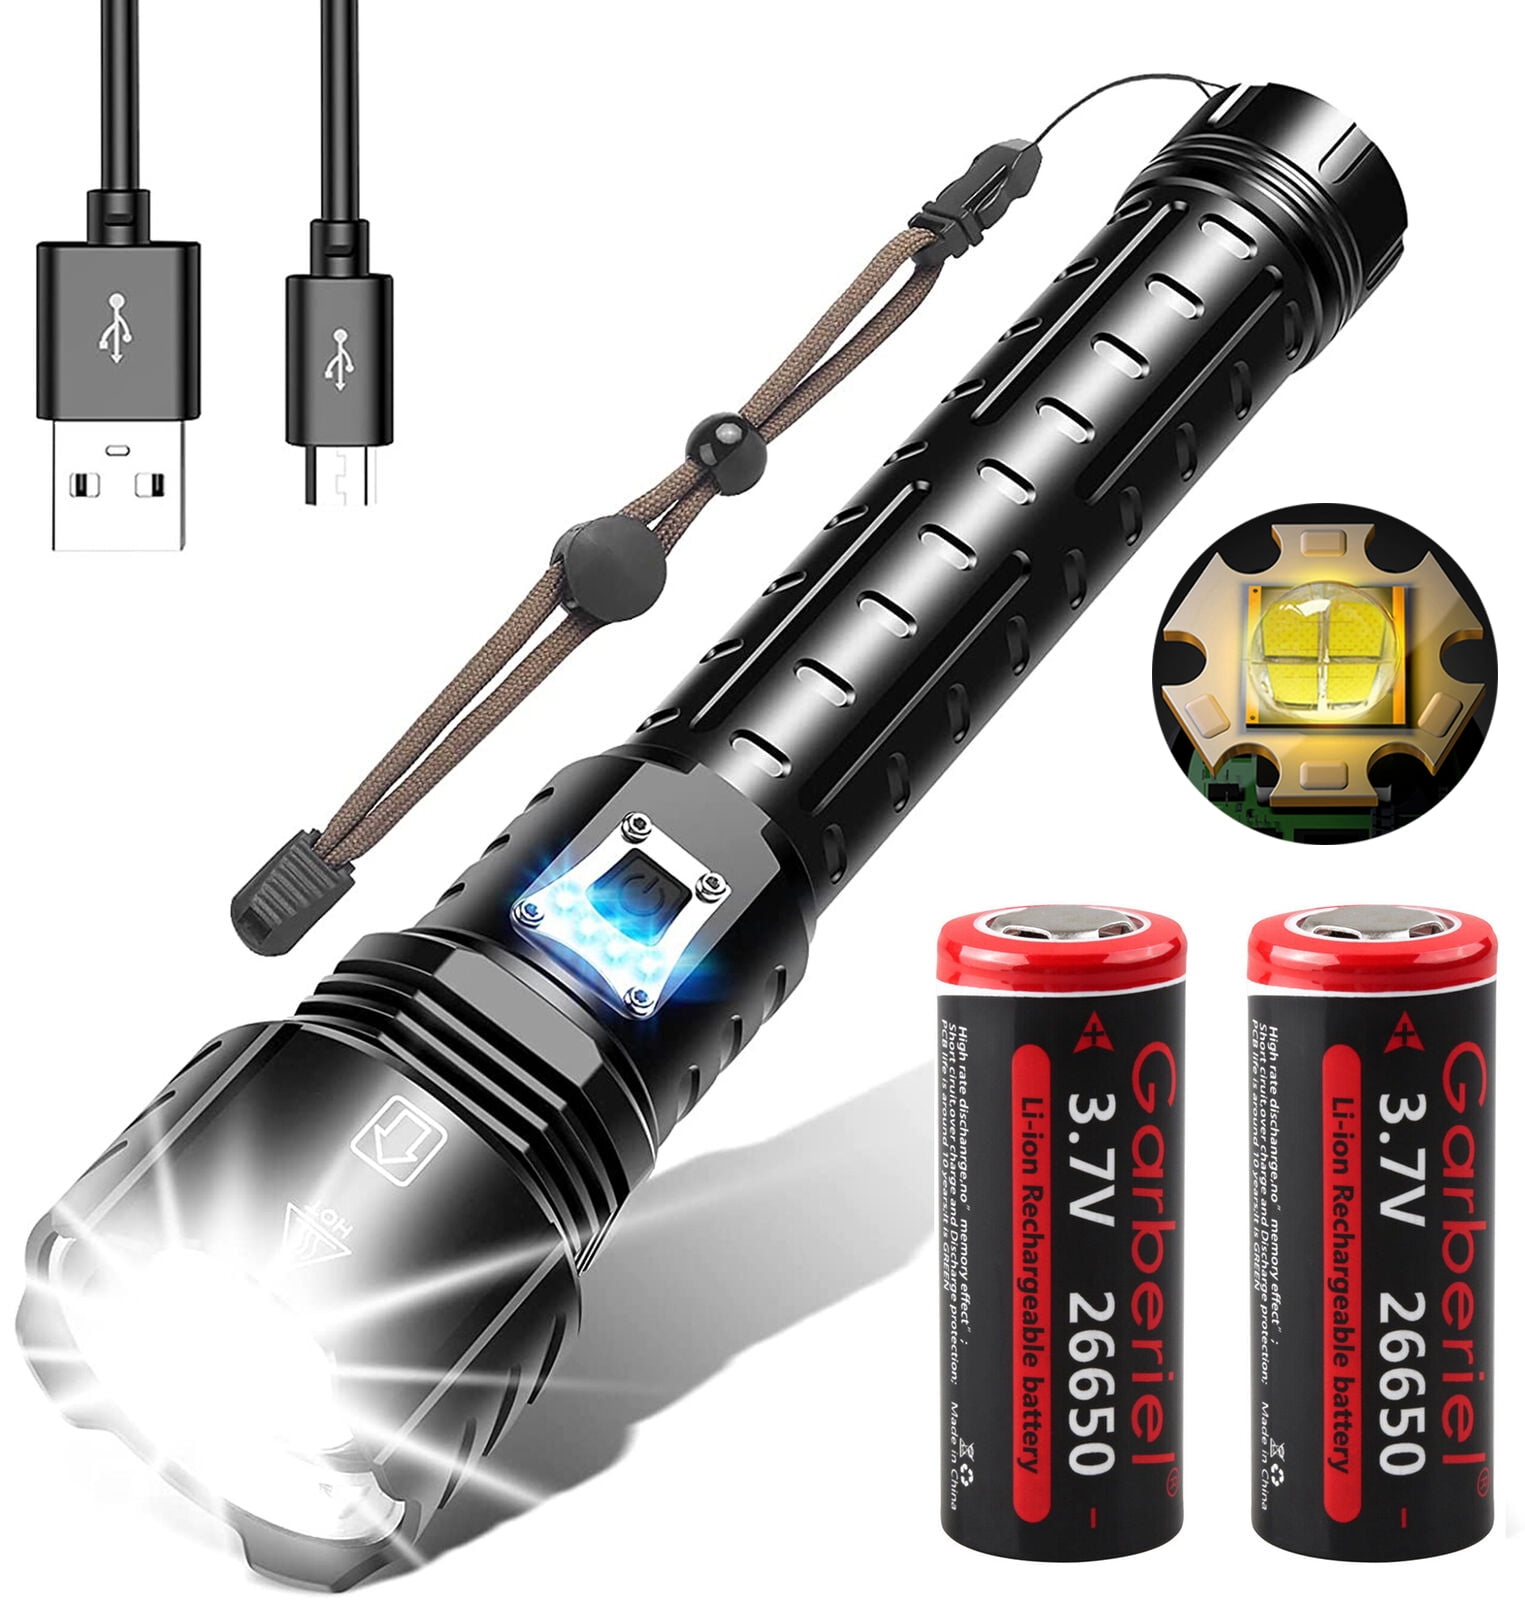 Garberiel XHP90.2 Super 2PCS Tactical for LED Hiking USB Camping Rechargeable Zoom Waterproof Flashlight 26650 Bright 120000Lumens with Batteries Torch